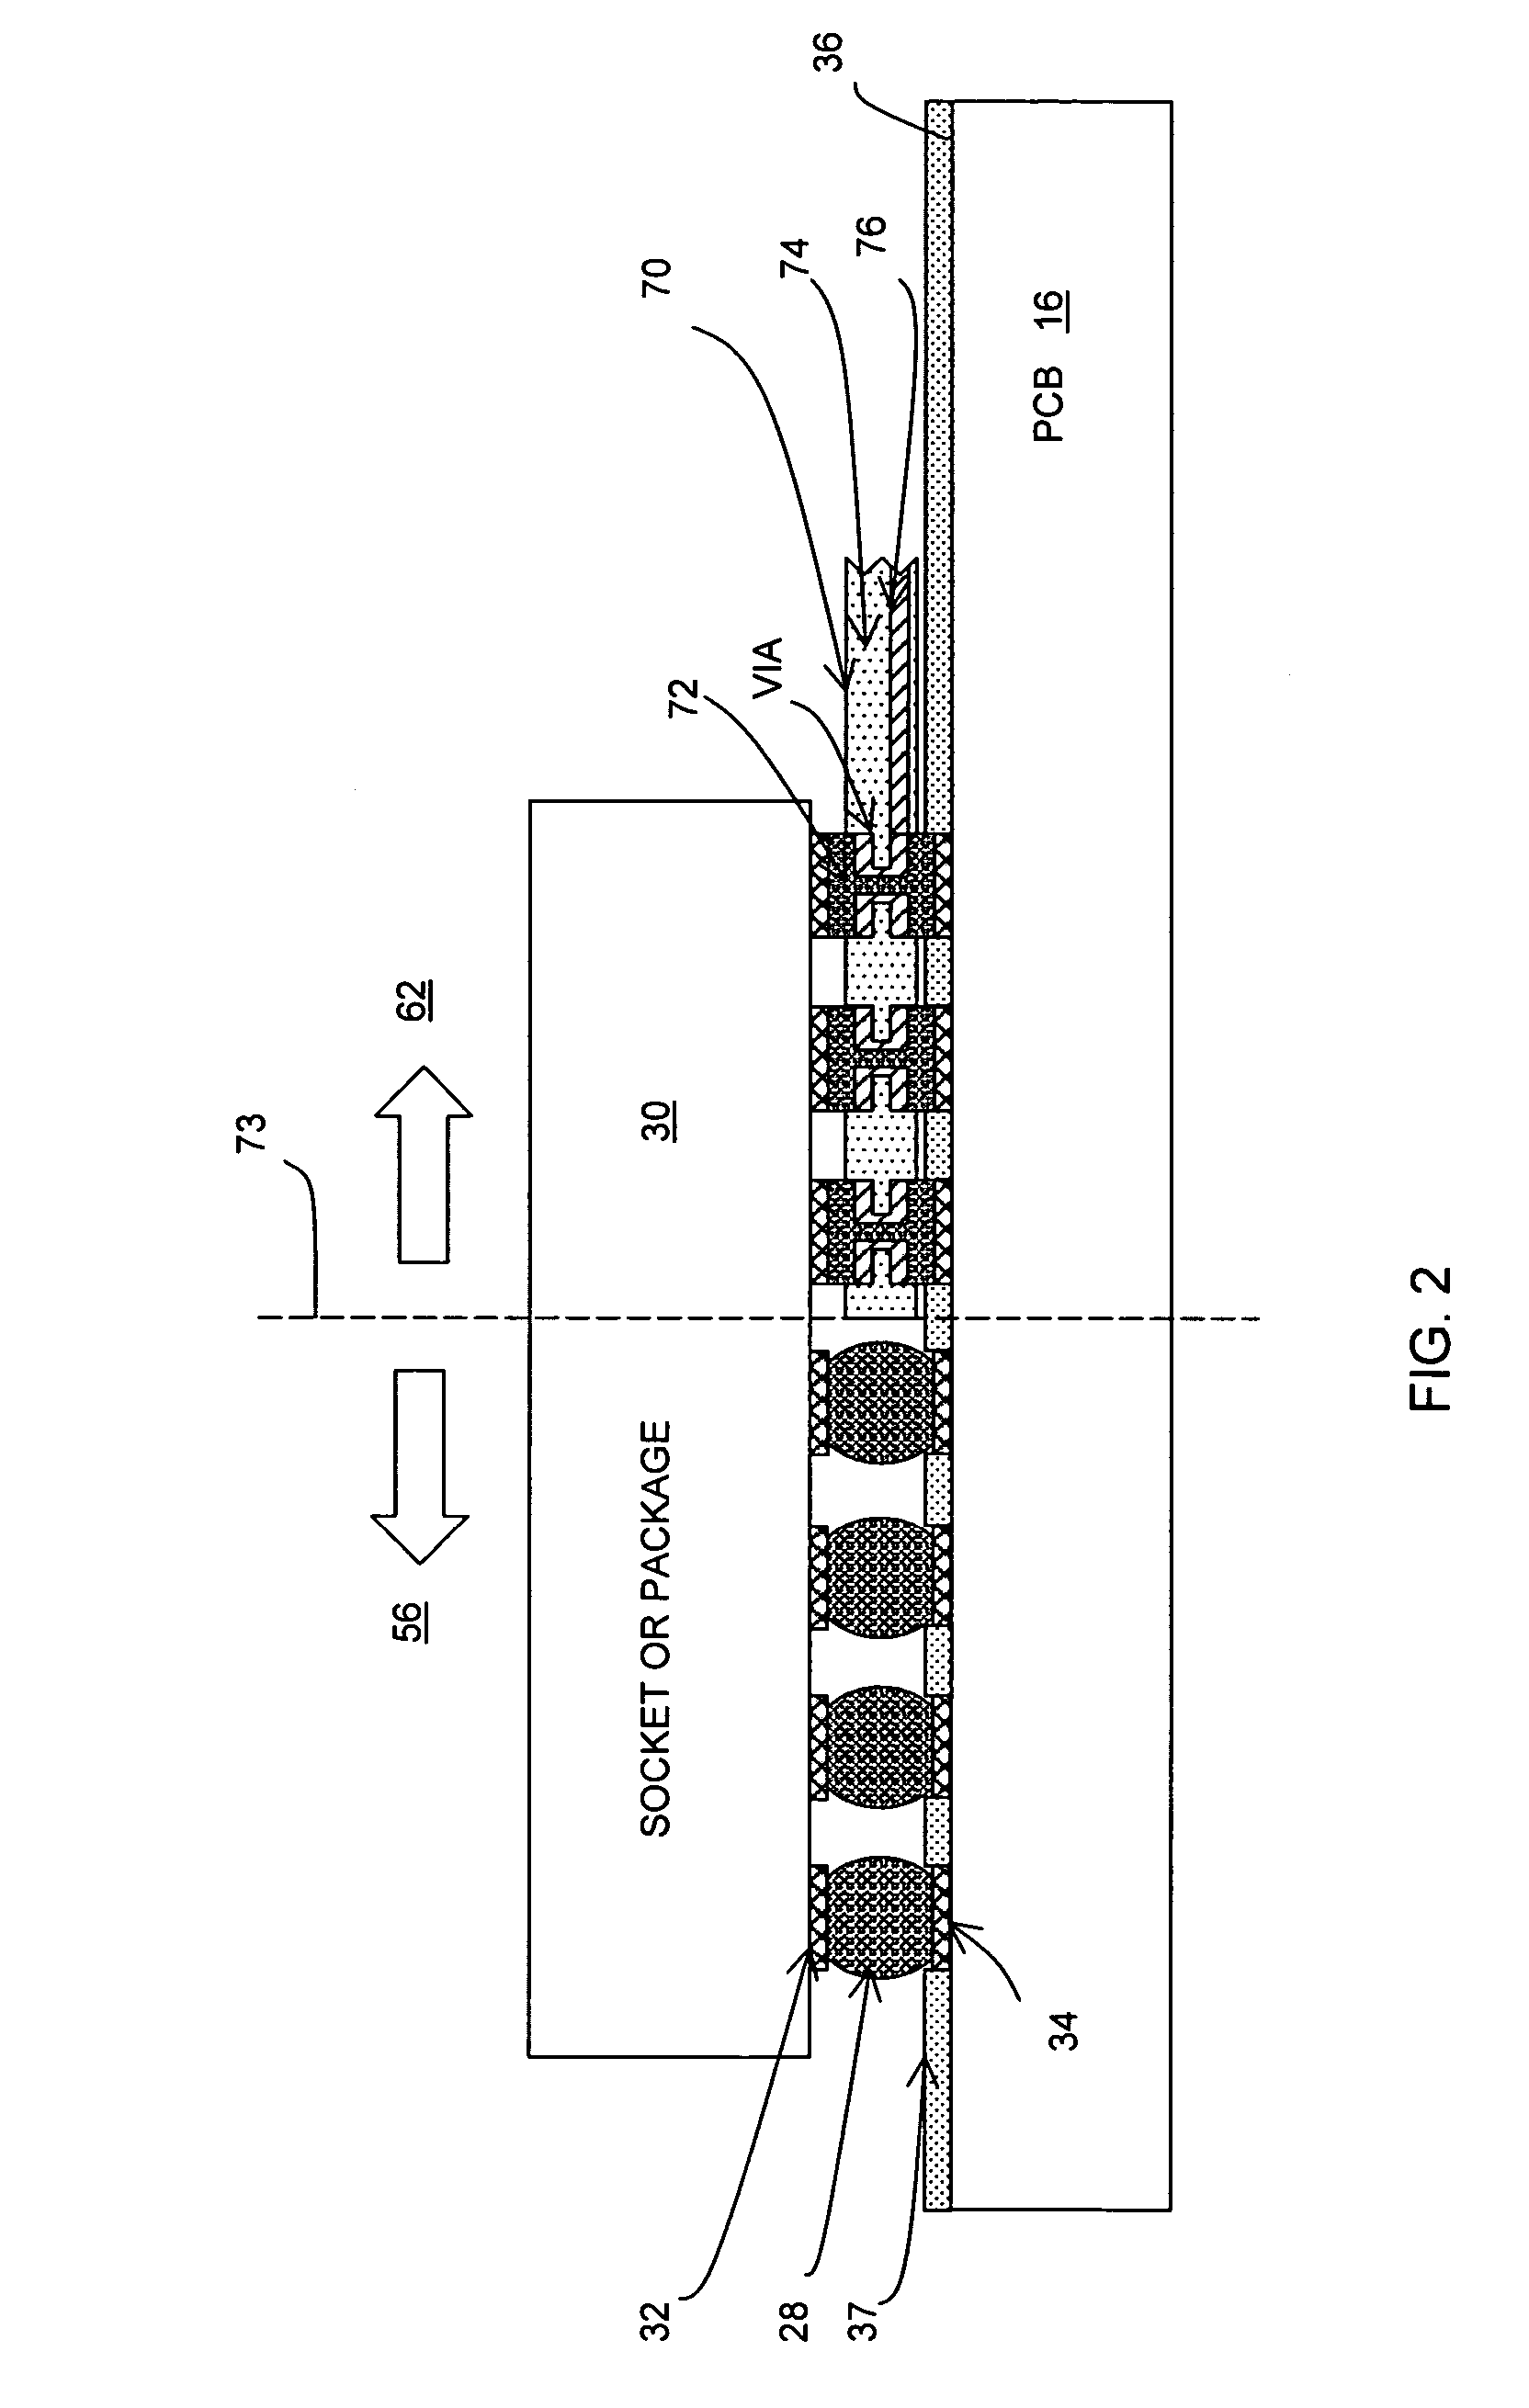 Delivery regions for power, ground and I/O signal paths in an IC package